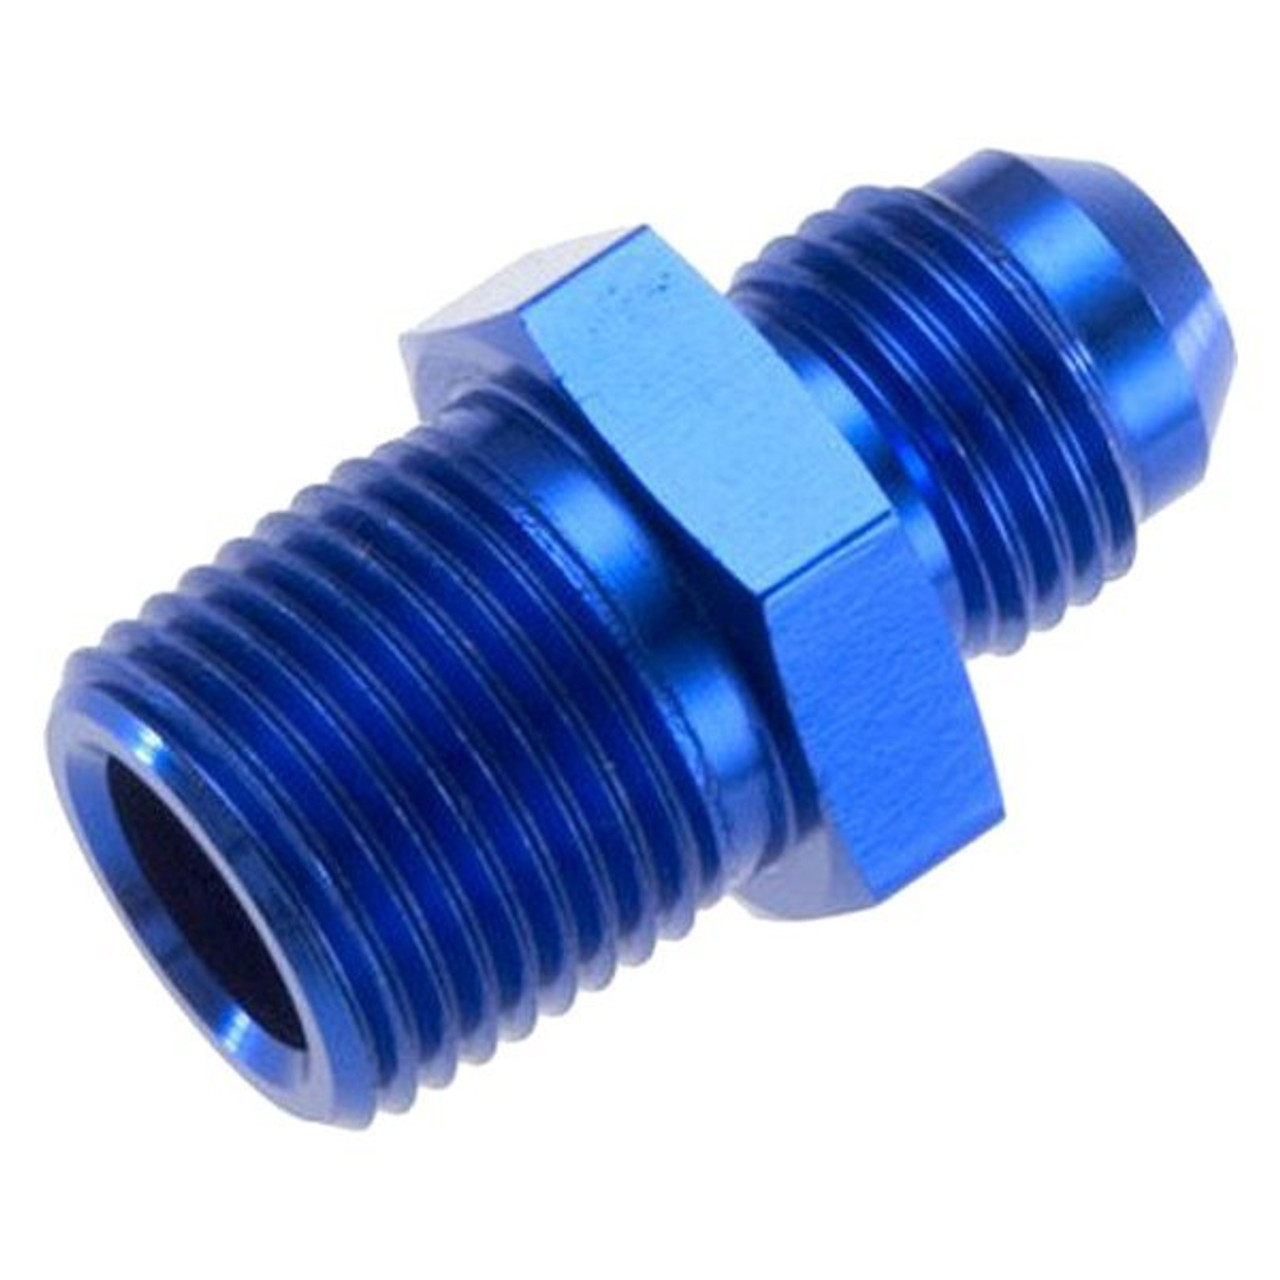 RHP816-12-08-2, Straight Male Adapter  -12 straight male adapter to -08 (1/2